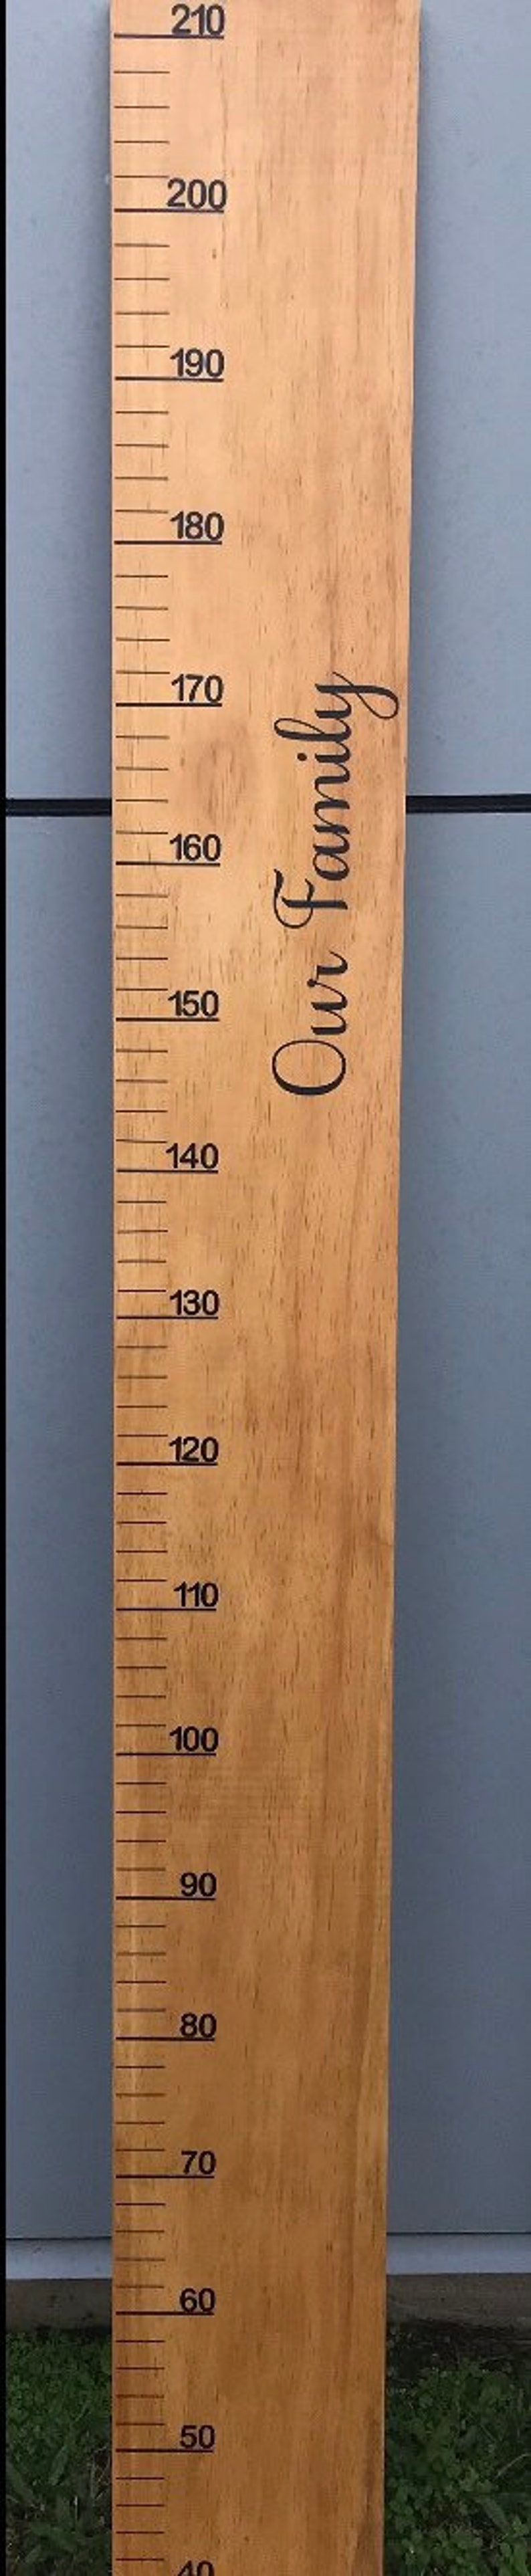 Wooden Height Chart Height Chart Ruler Measurement | Etsy